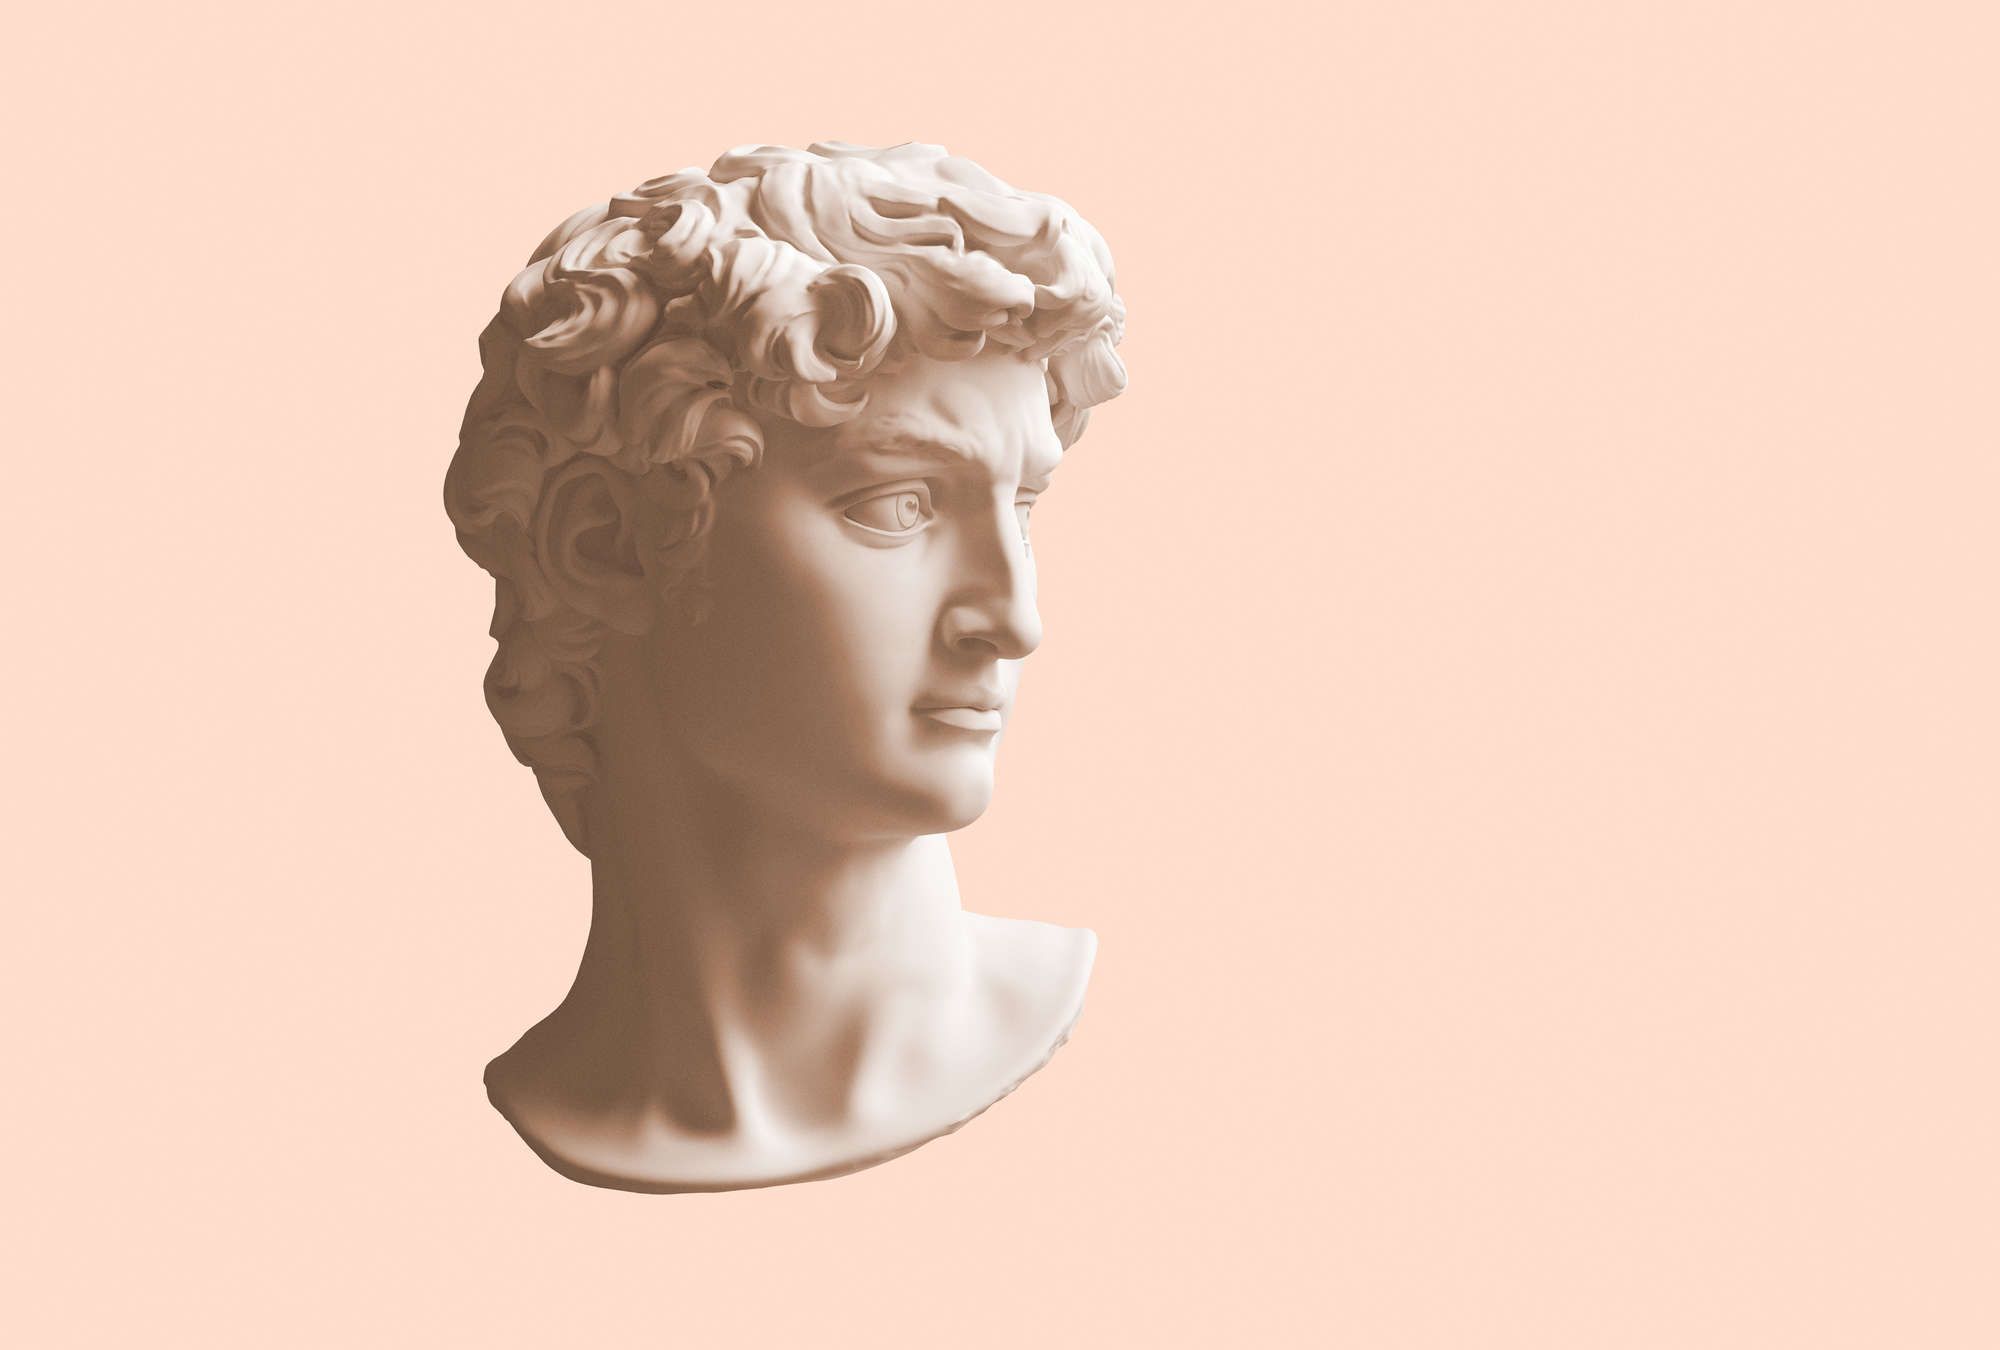             Photo wallpaper »mars« - antique male bust - Smooth, slightly shiny premium non-woven fabric
        